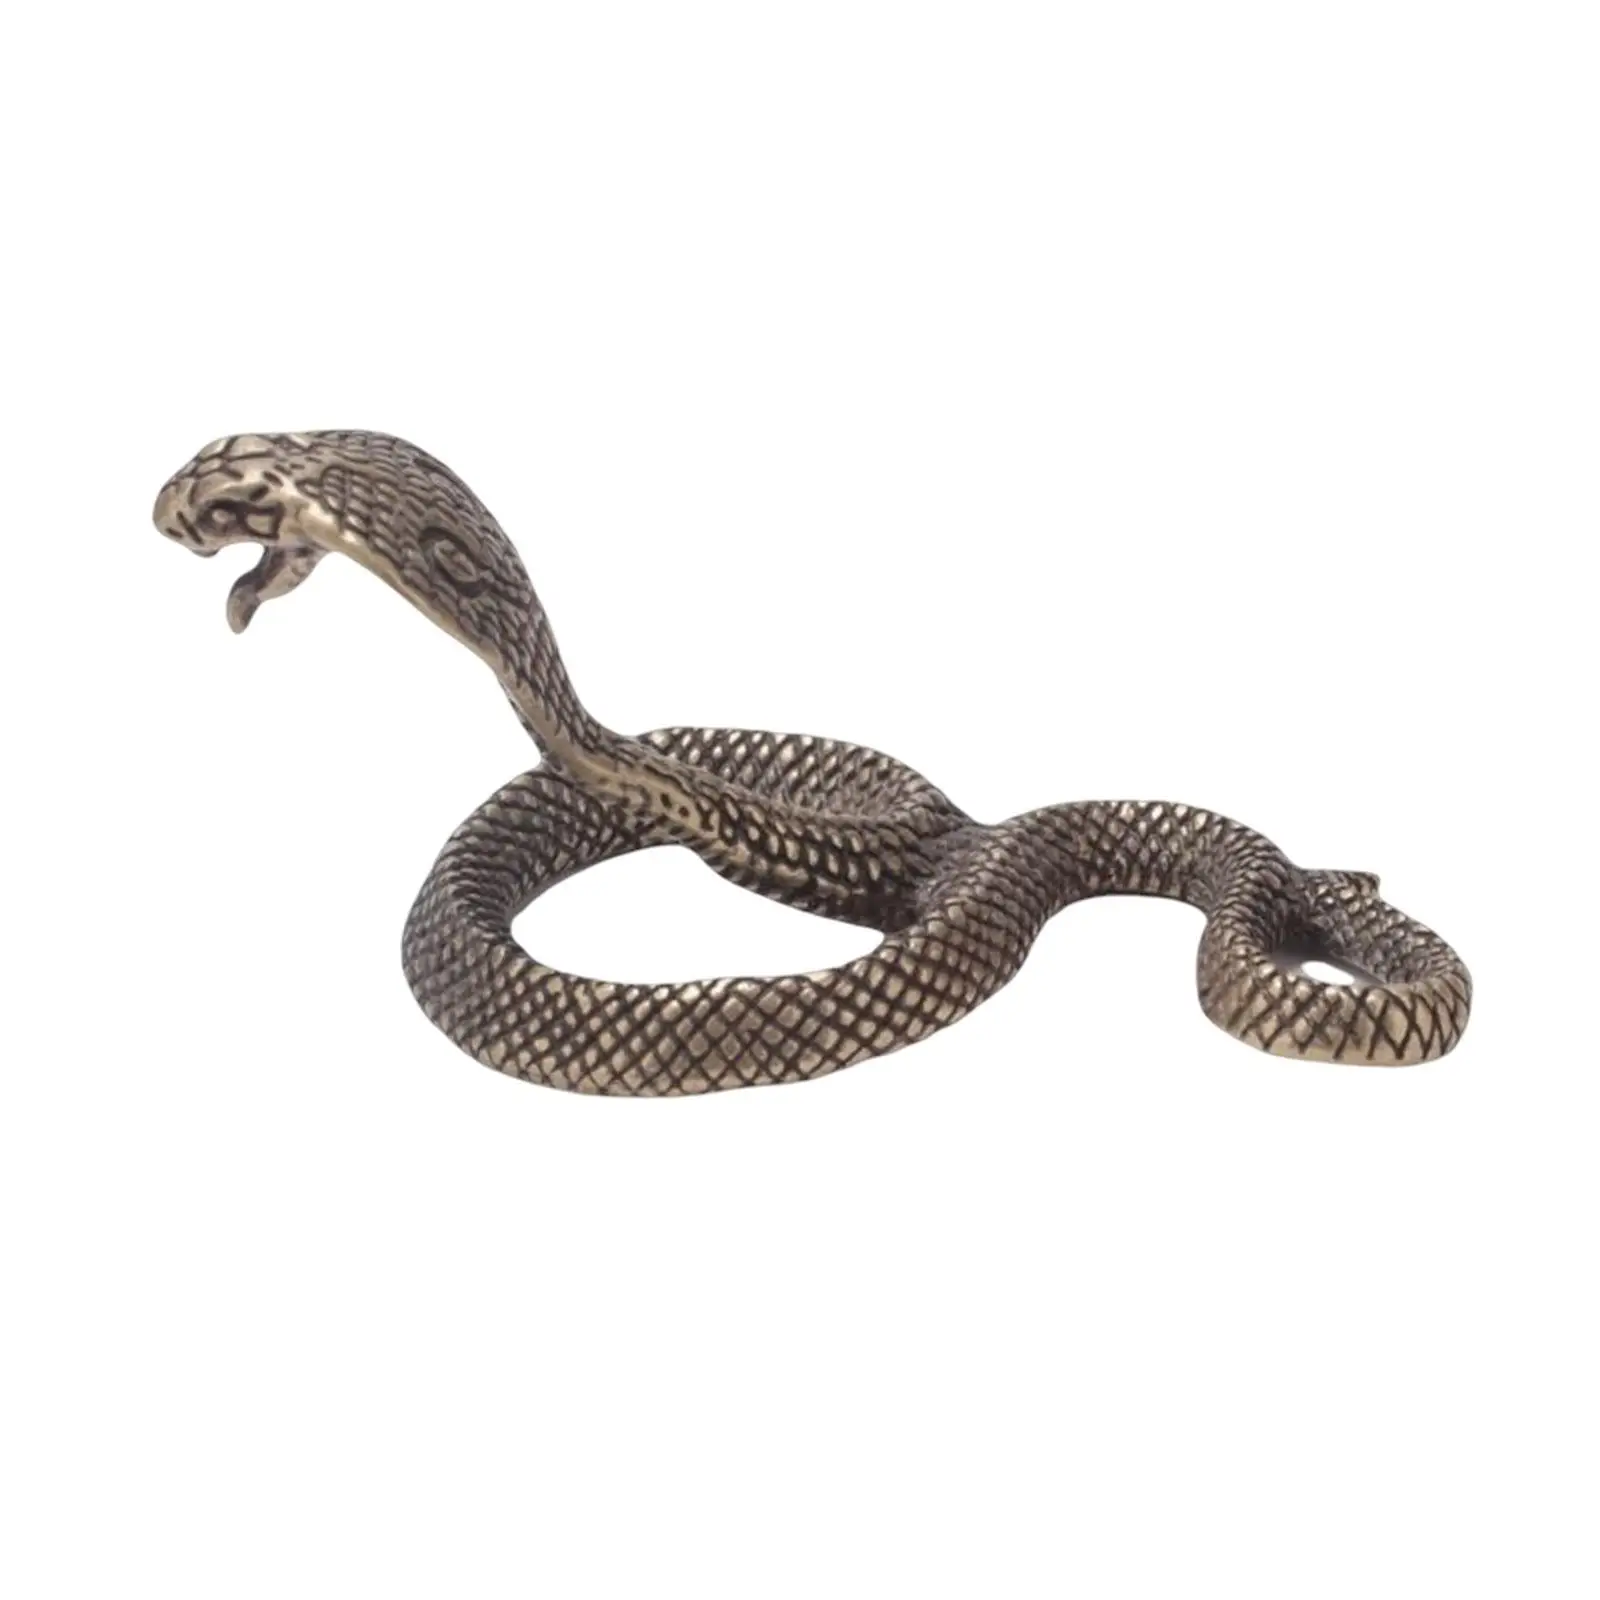 Snake Statue Animal Sculpture Craft Figurine for Home Decor Office Party Shelf